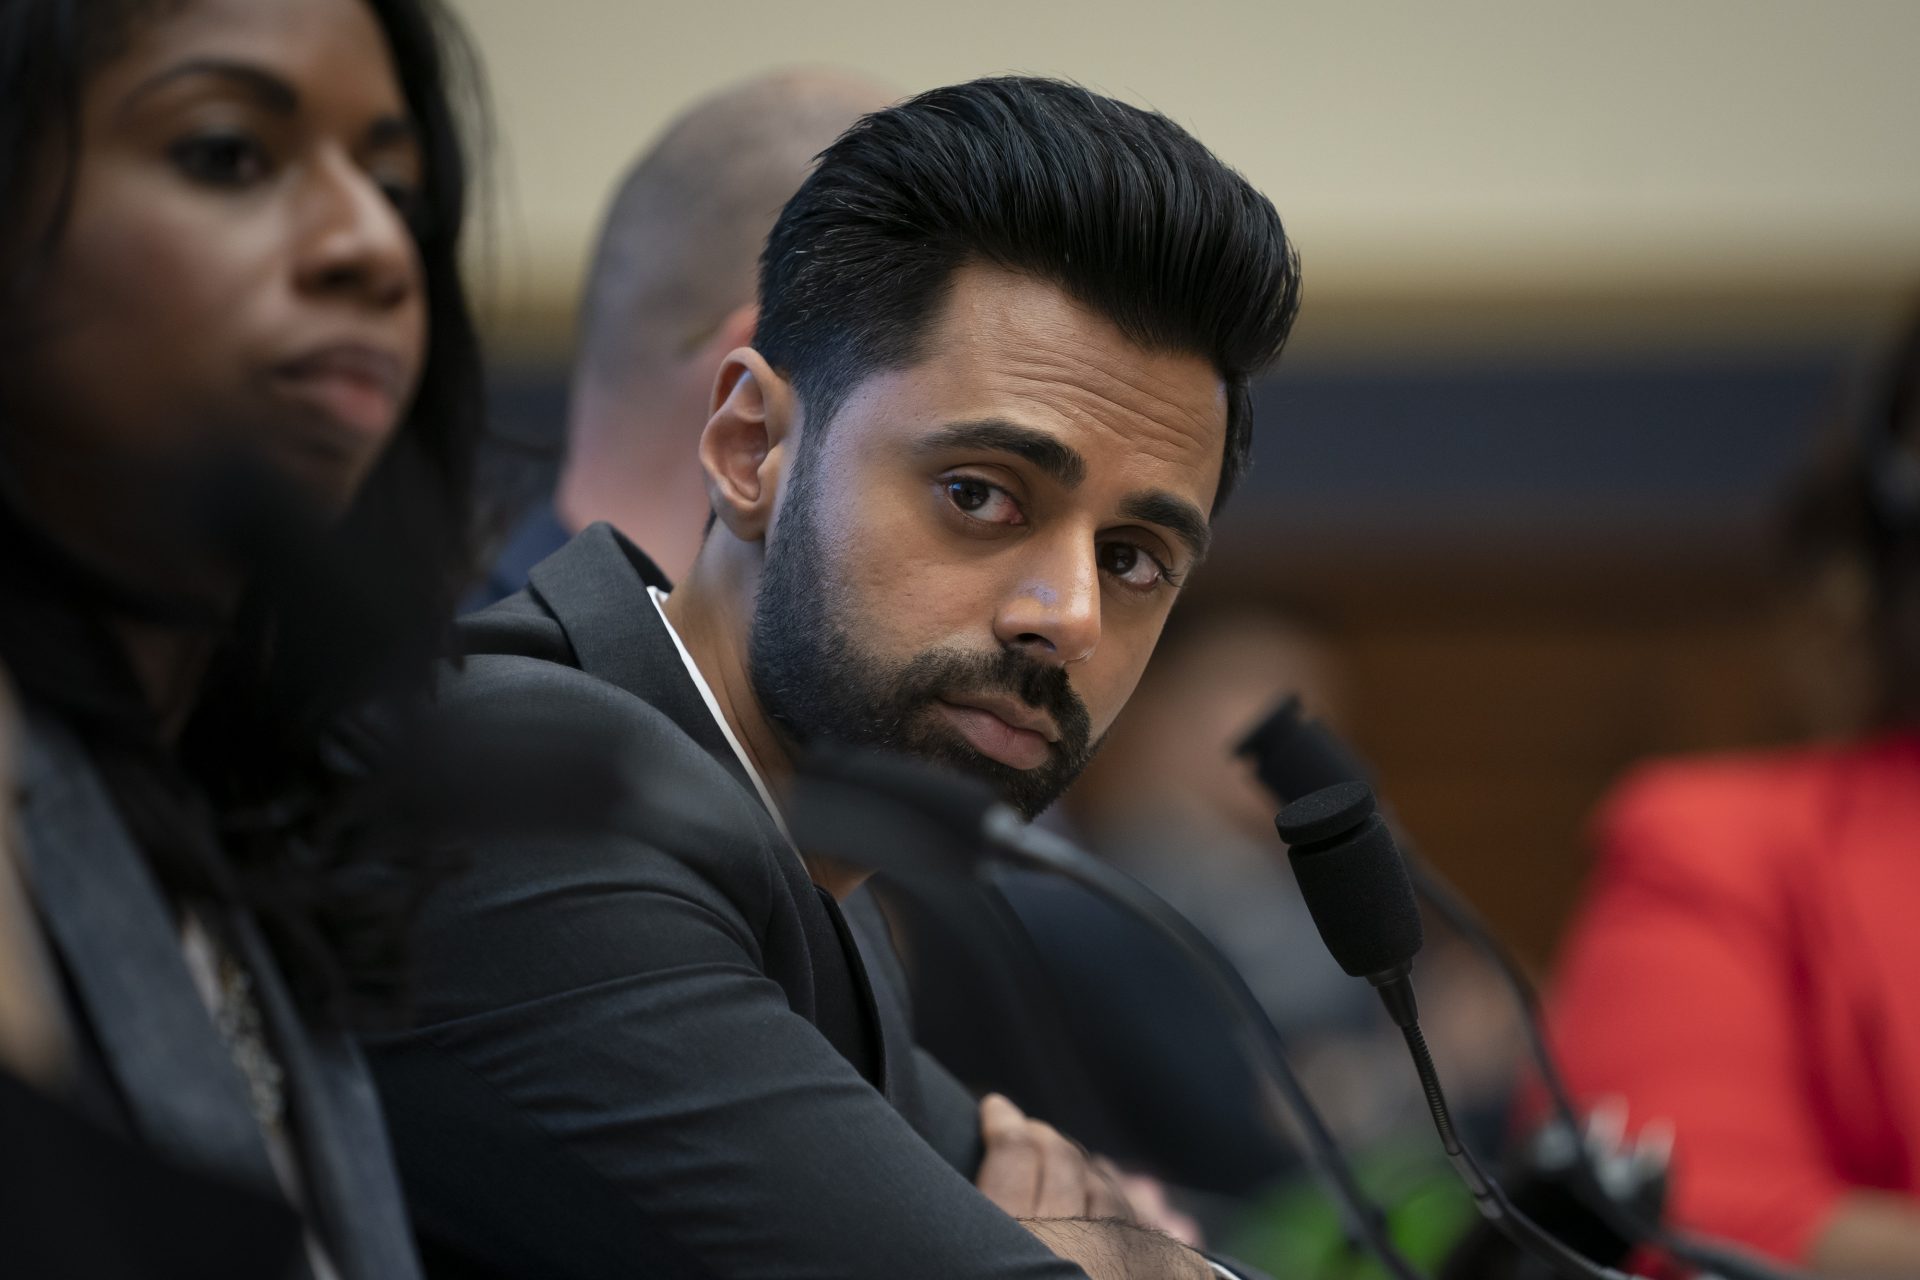 FILE PHOTO: Comedian Hasan Minhaj calls on Congress to address the student loan debt crisis as he and others testify before the House Financial Services Committee at a hearing on protecting student loan borrowers, on Capitol Hill in Washington, Tuesday, Sept. 10, 2019.